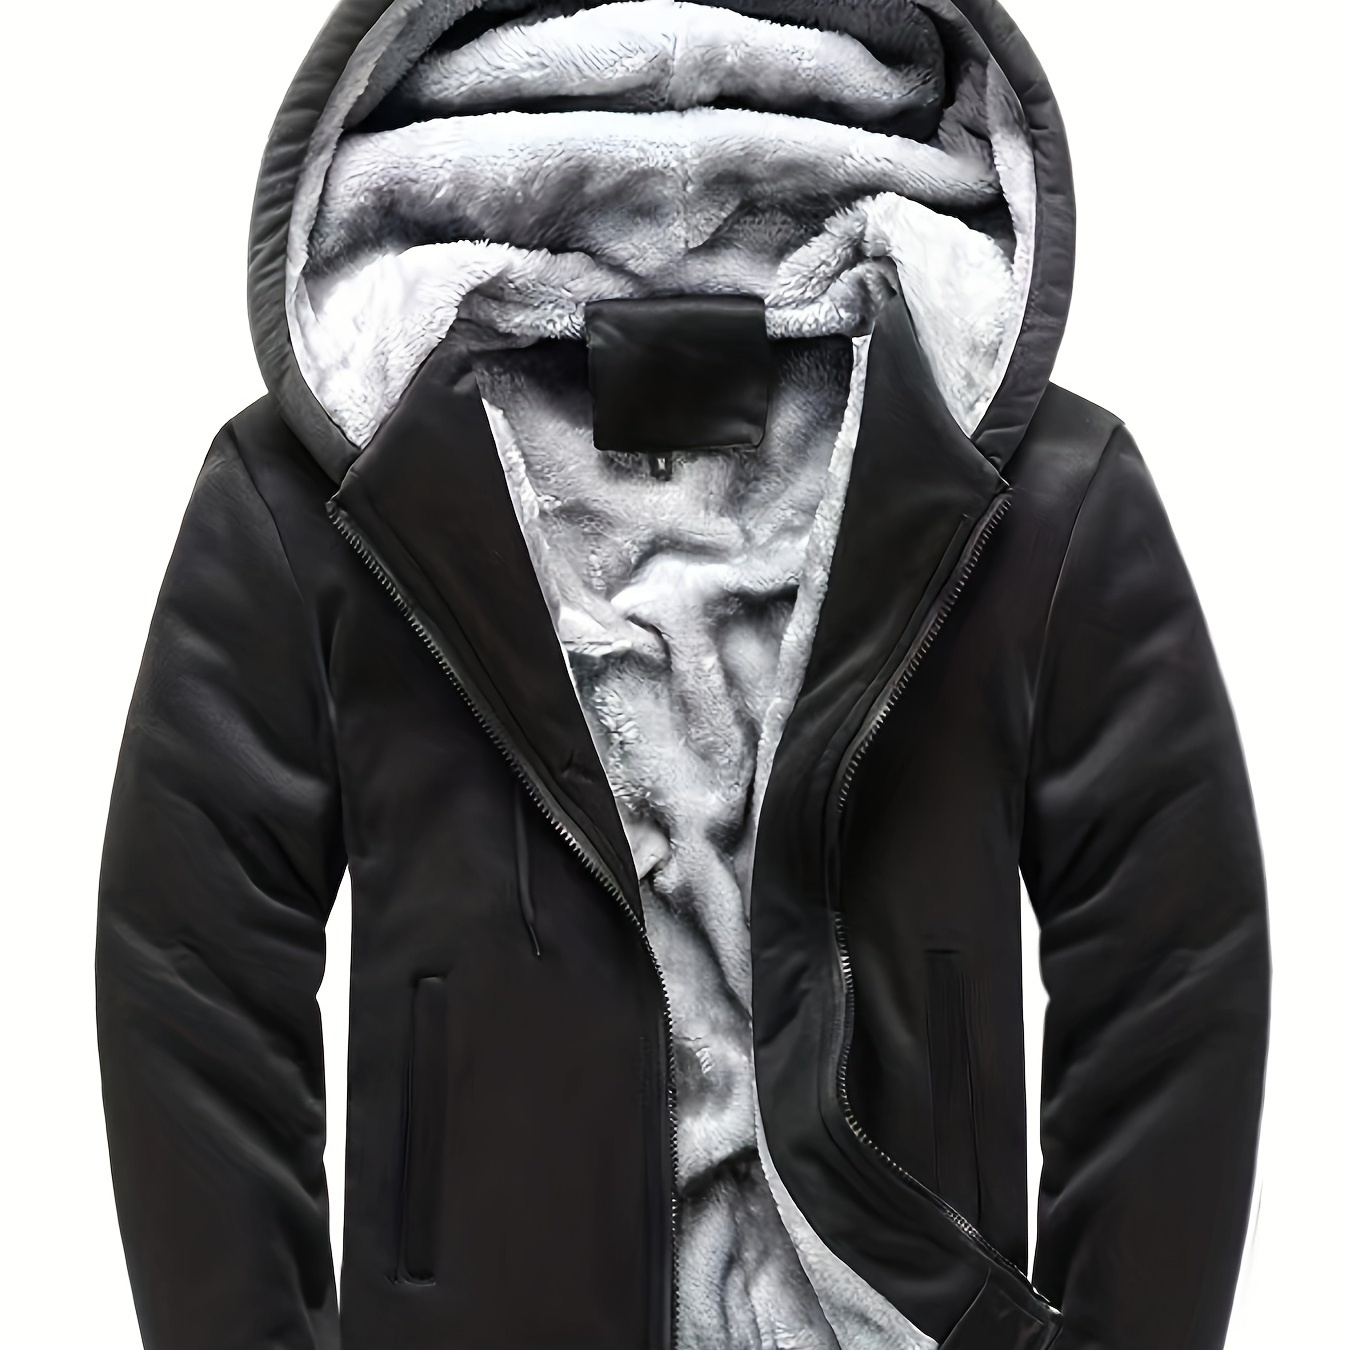 

Men's Winter Thick And Padded Warm Zip Up Hooded Jacket Best Sellers